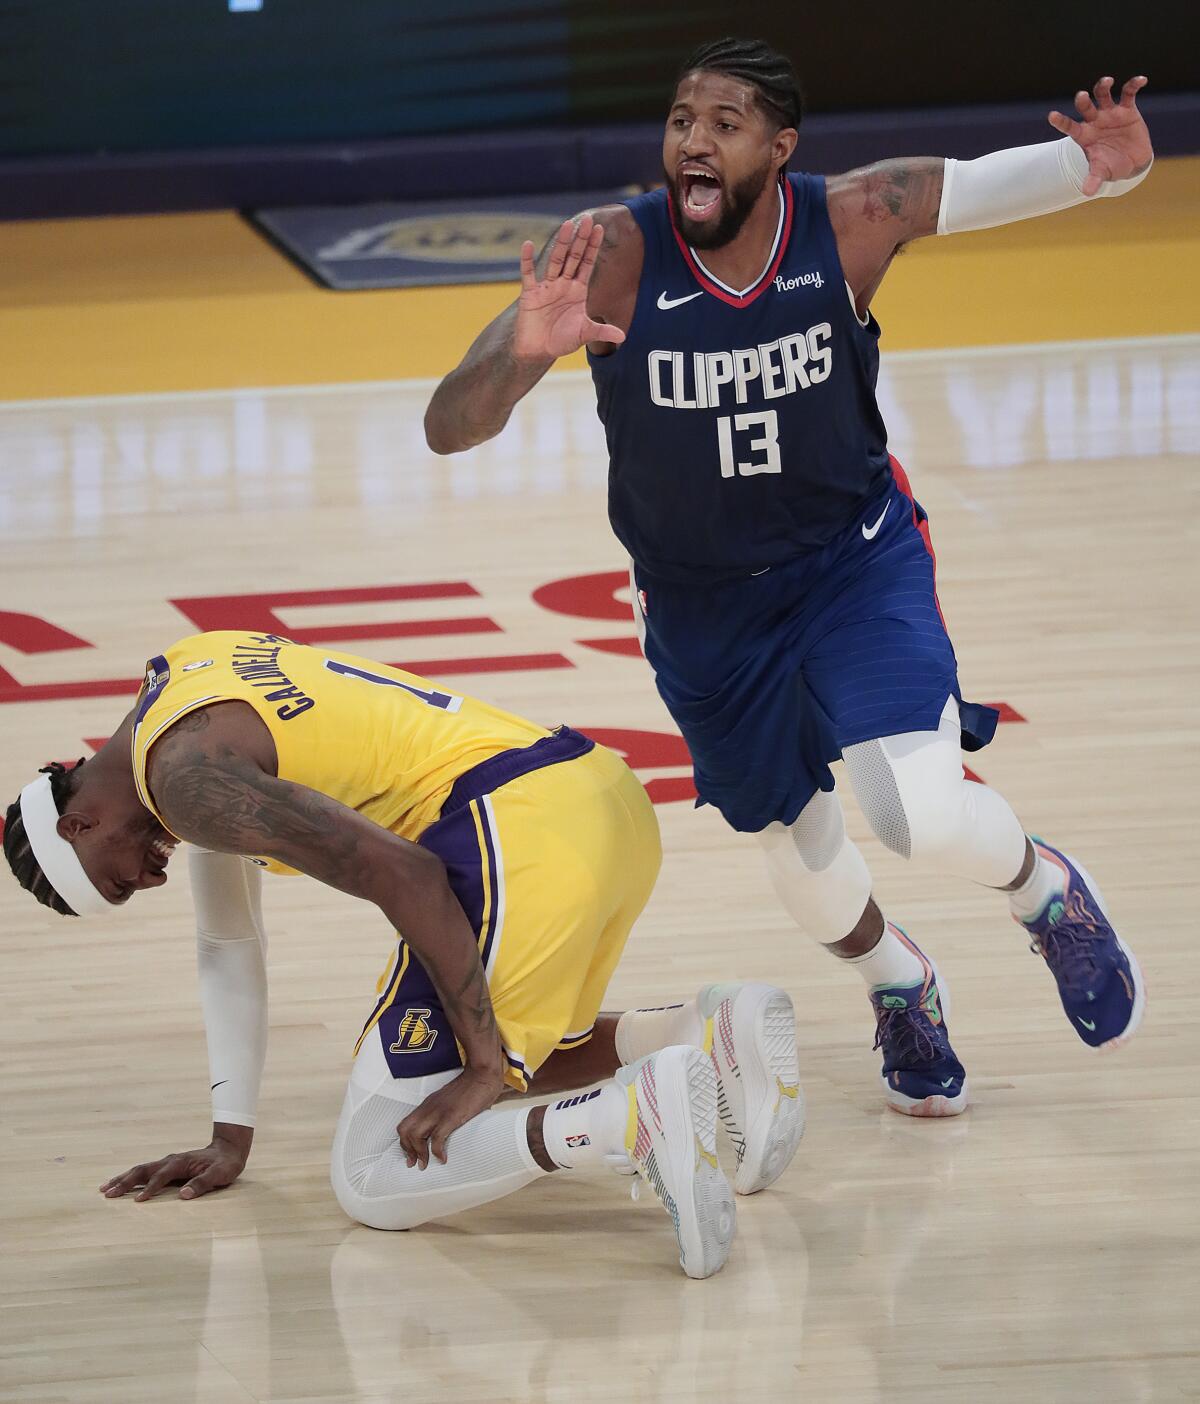 Clippers guard Paul George calls for the ball as Lakers guard Kentavious Caldwell-Pope holds his calf.